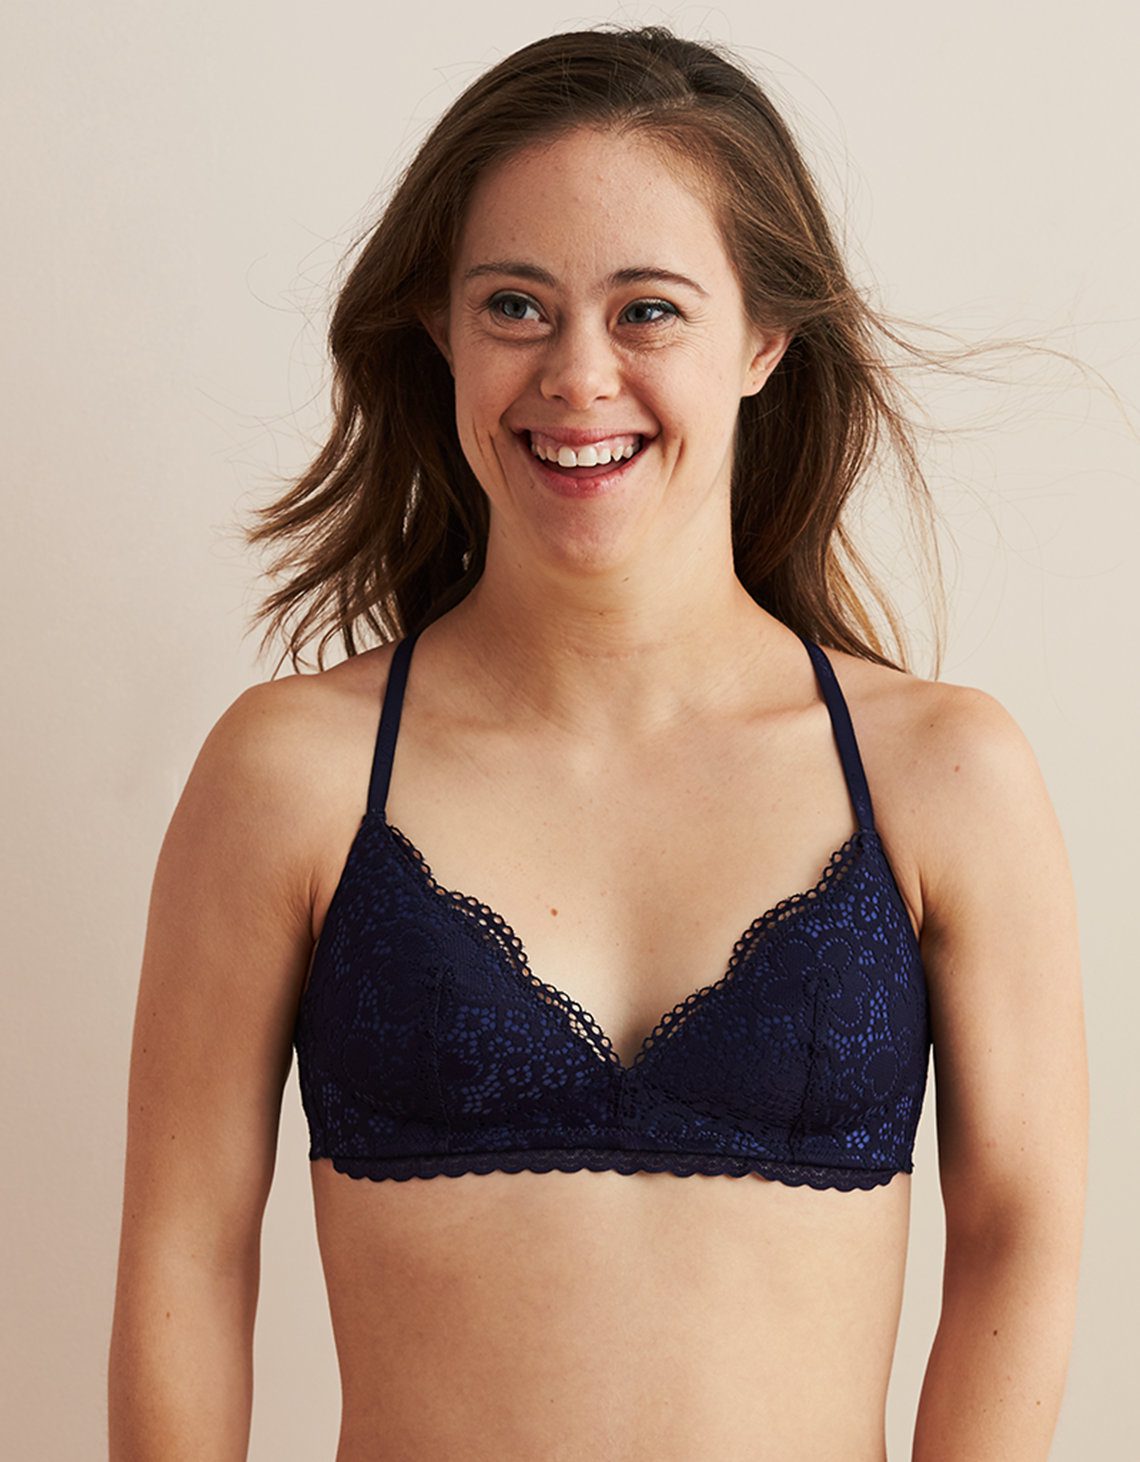 Why a Good Bra Fit Matters